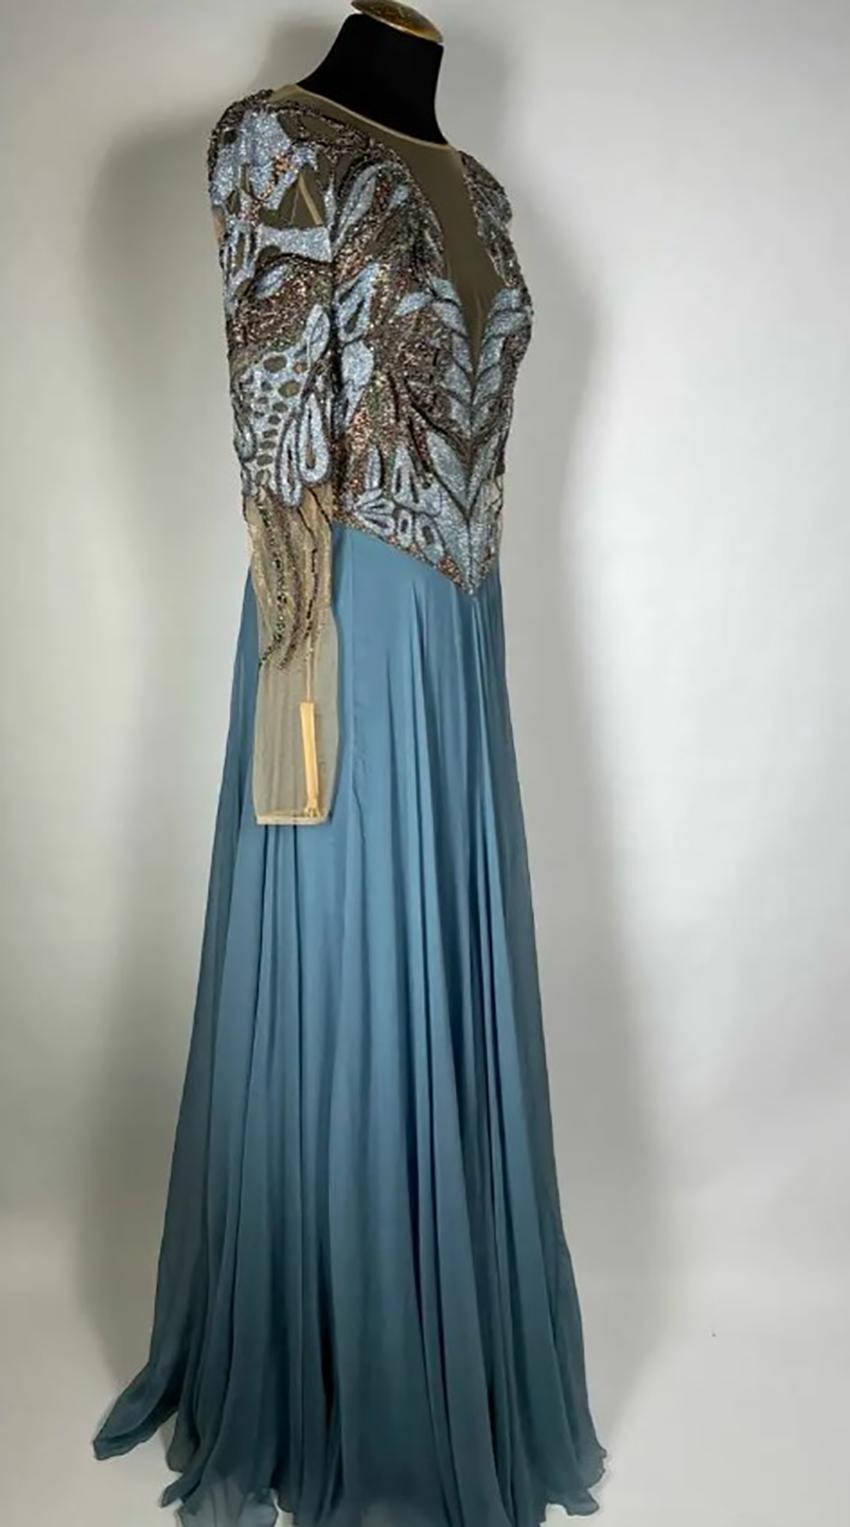 ZUHAIR MURAD

BLUE CHIFFON LONG GOWN DRESS
Embroidered with glass and crystals 

Long transparent sleeves
Back zipper closure

Content: 92% viscose, 2% elastane 

Size IT 38 - US 2

Pre-owned, very good condition.
Small defects on the skirt are